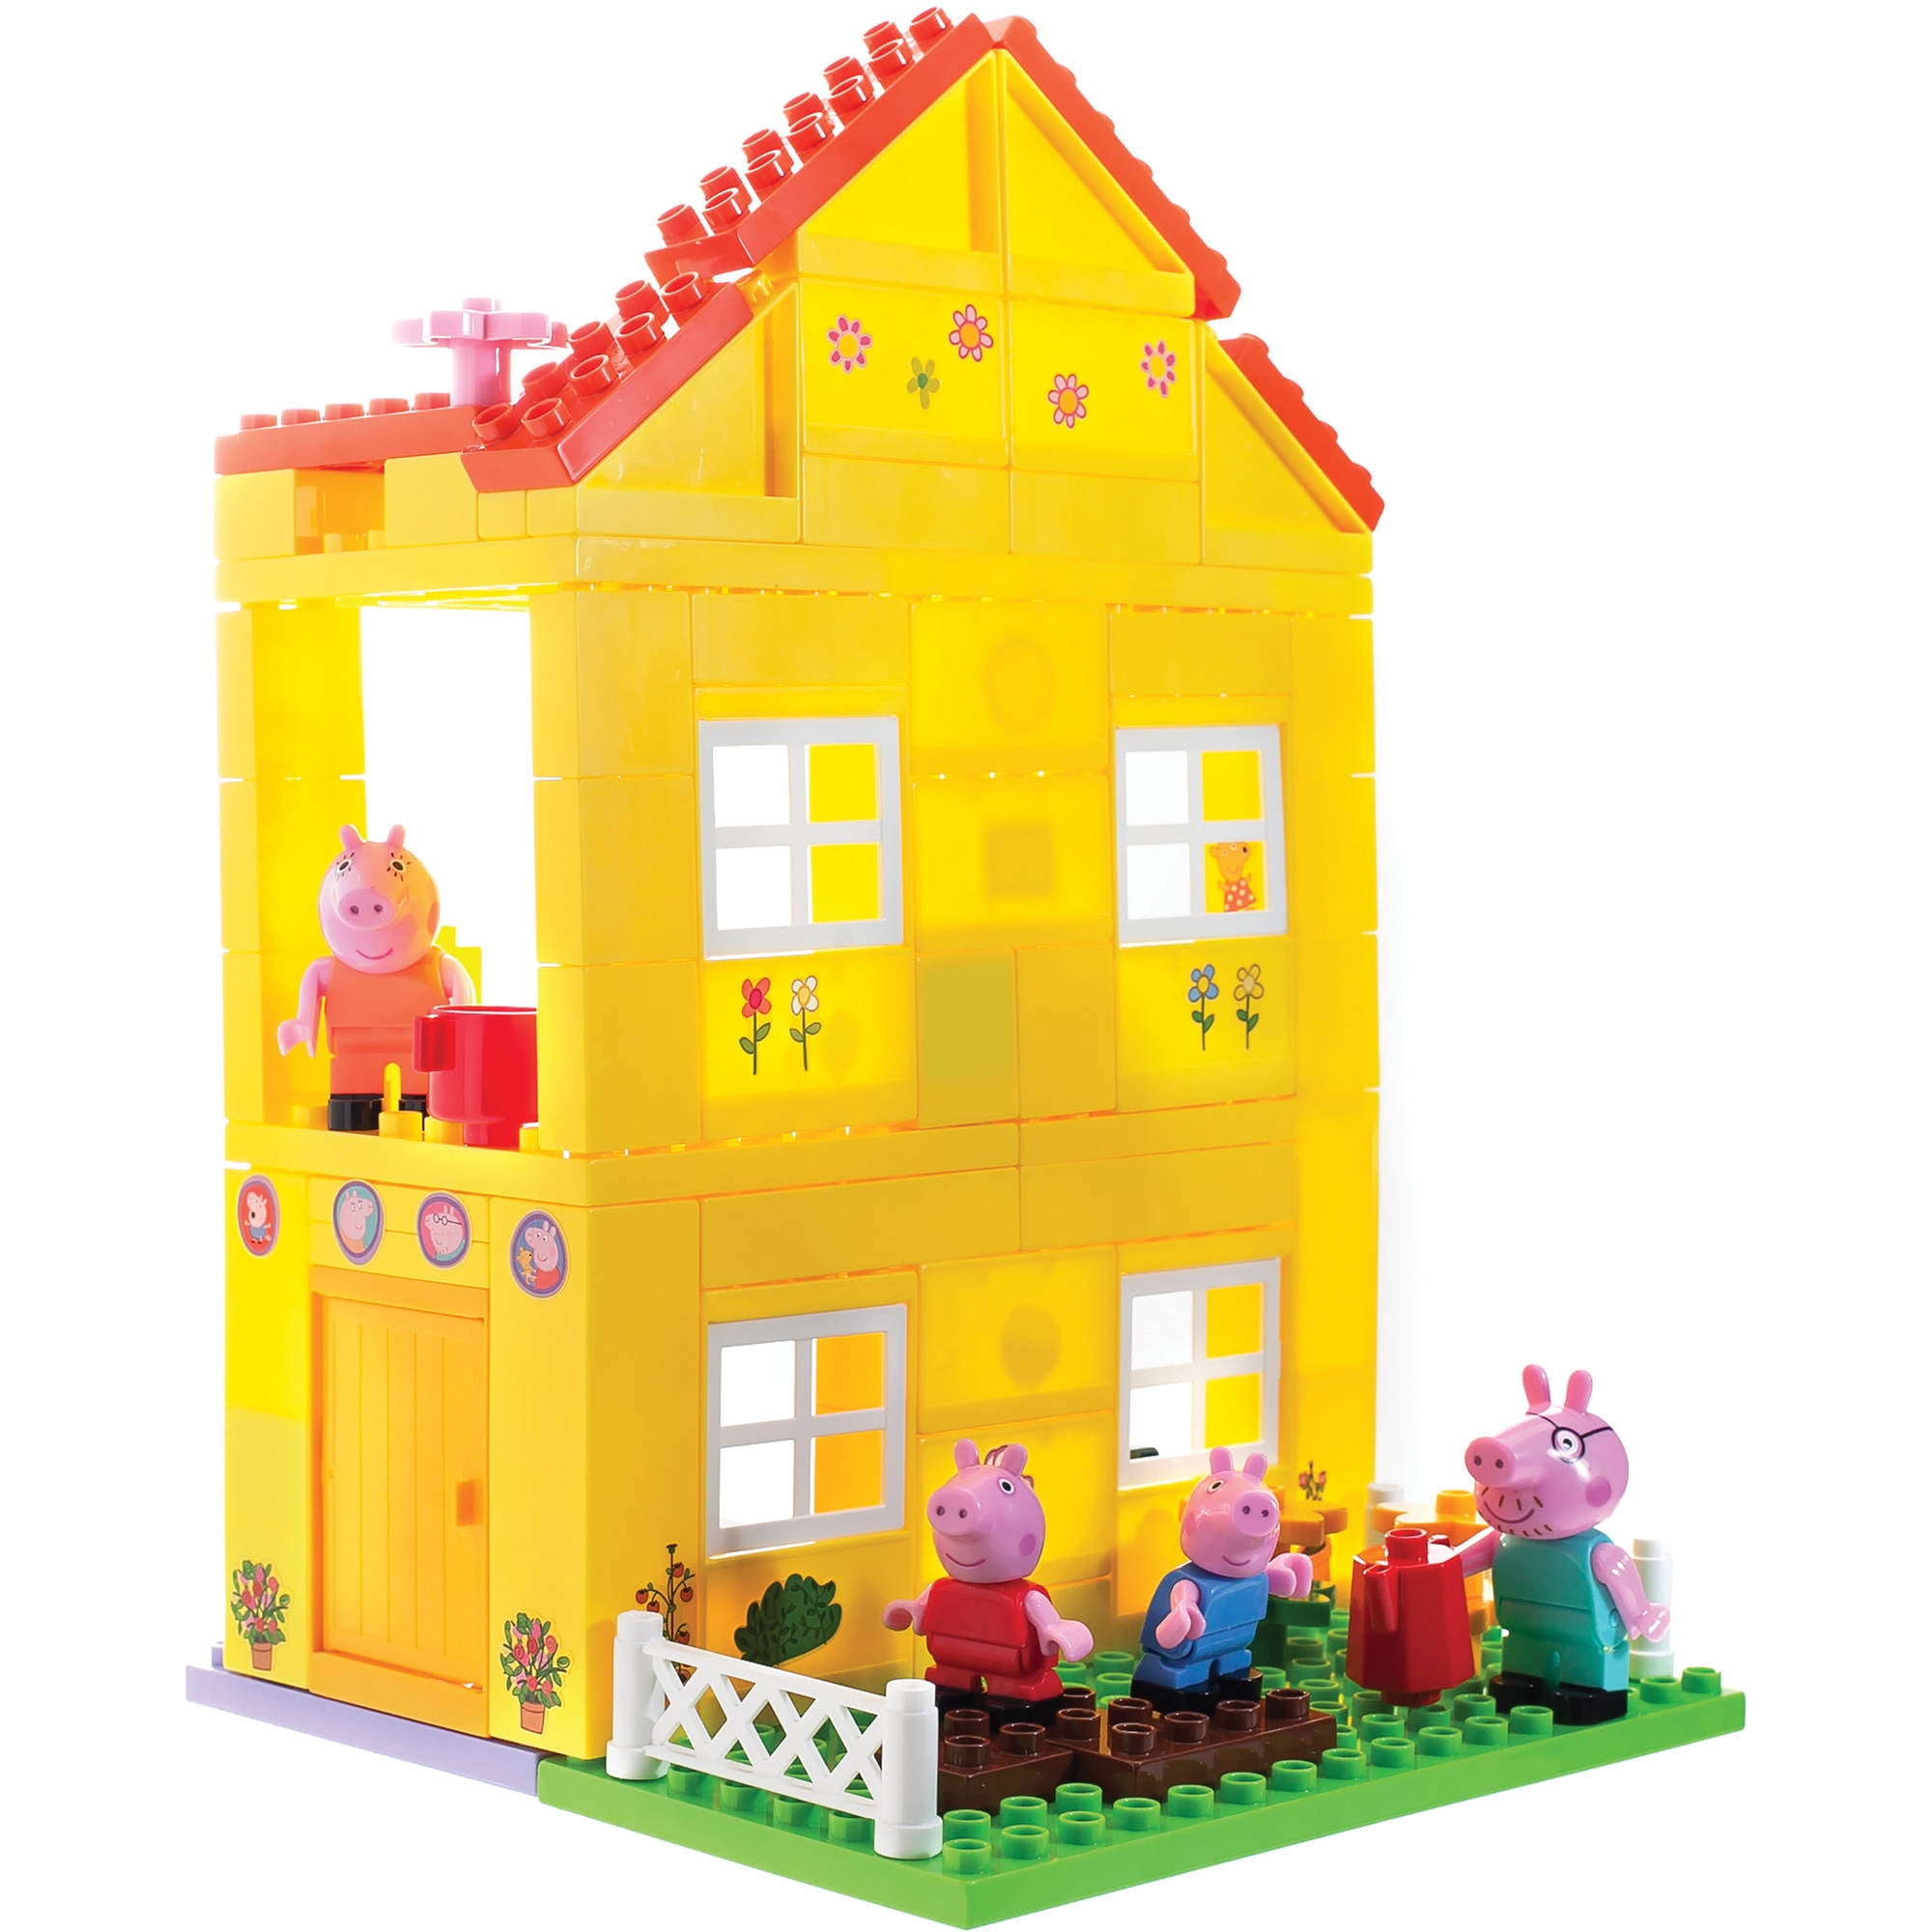 Peppa Pig Simba Home building blocks 84 Pieces Includes 4 Figures 3 Years 